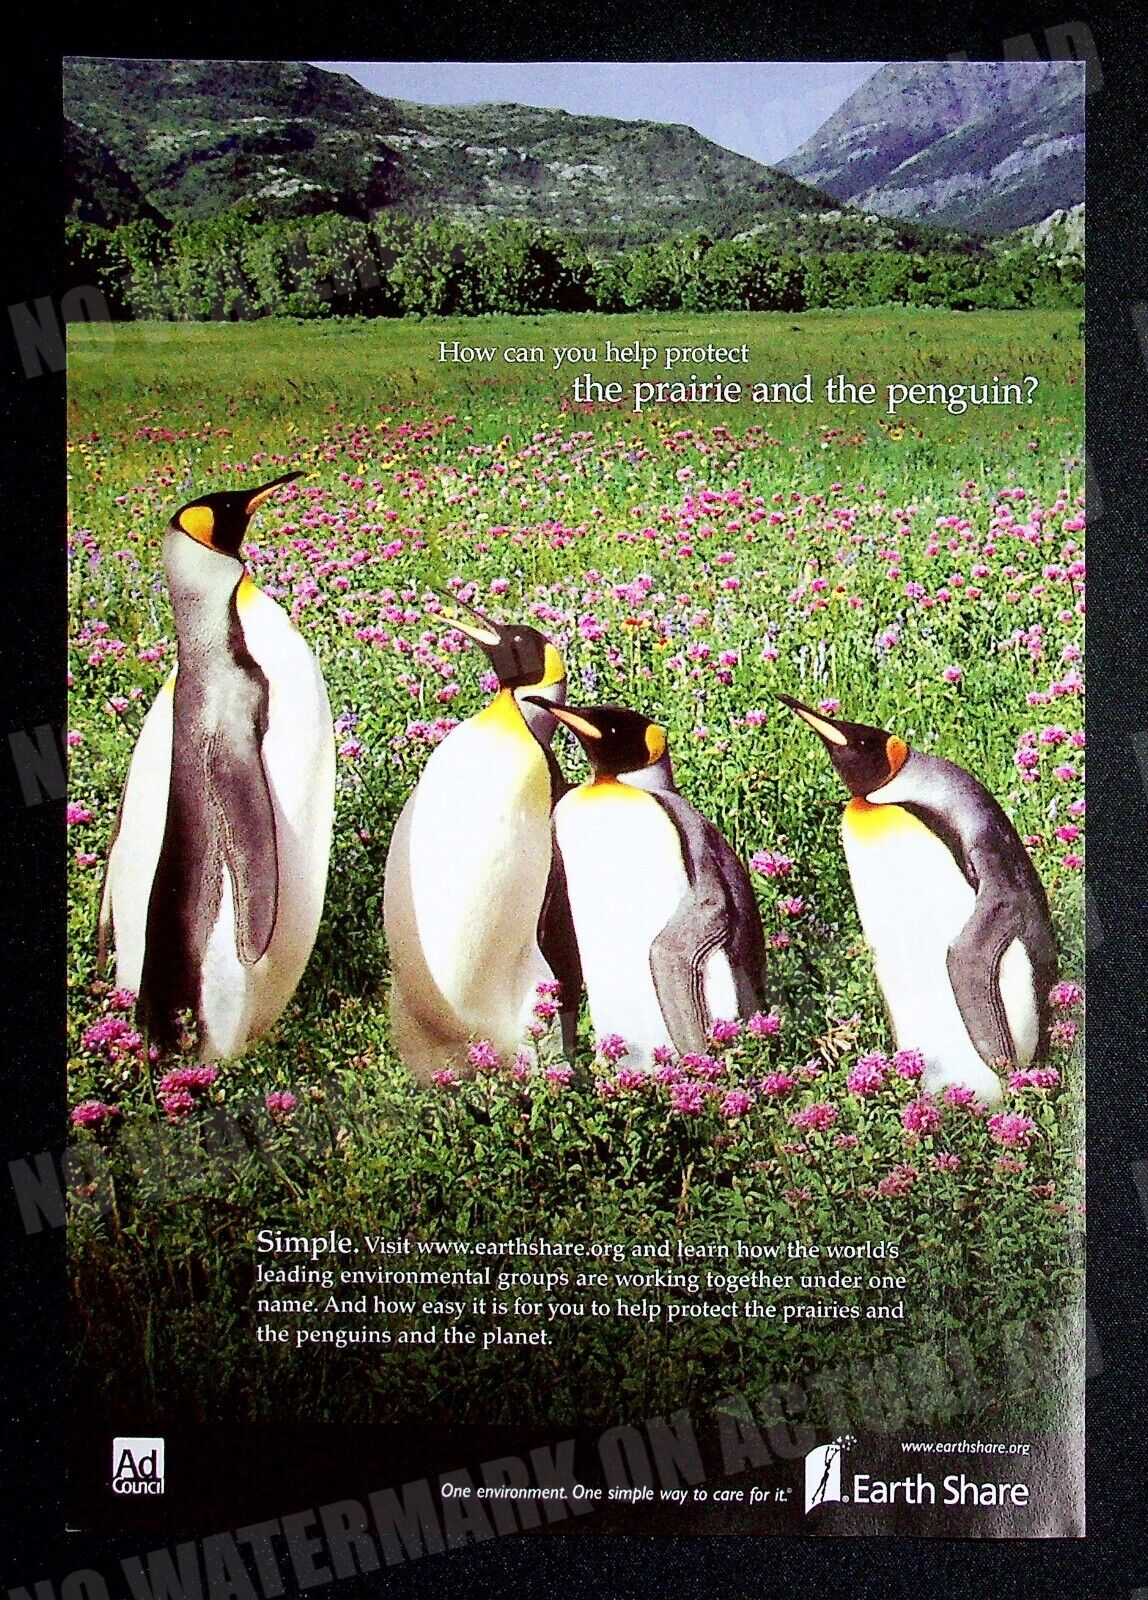 Earth Share Conservation 2006 Penguins Trade Print Magazine Ad Poster ADVERT